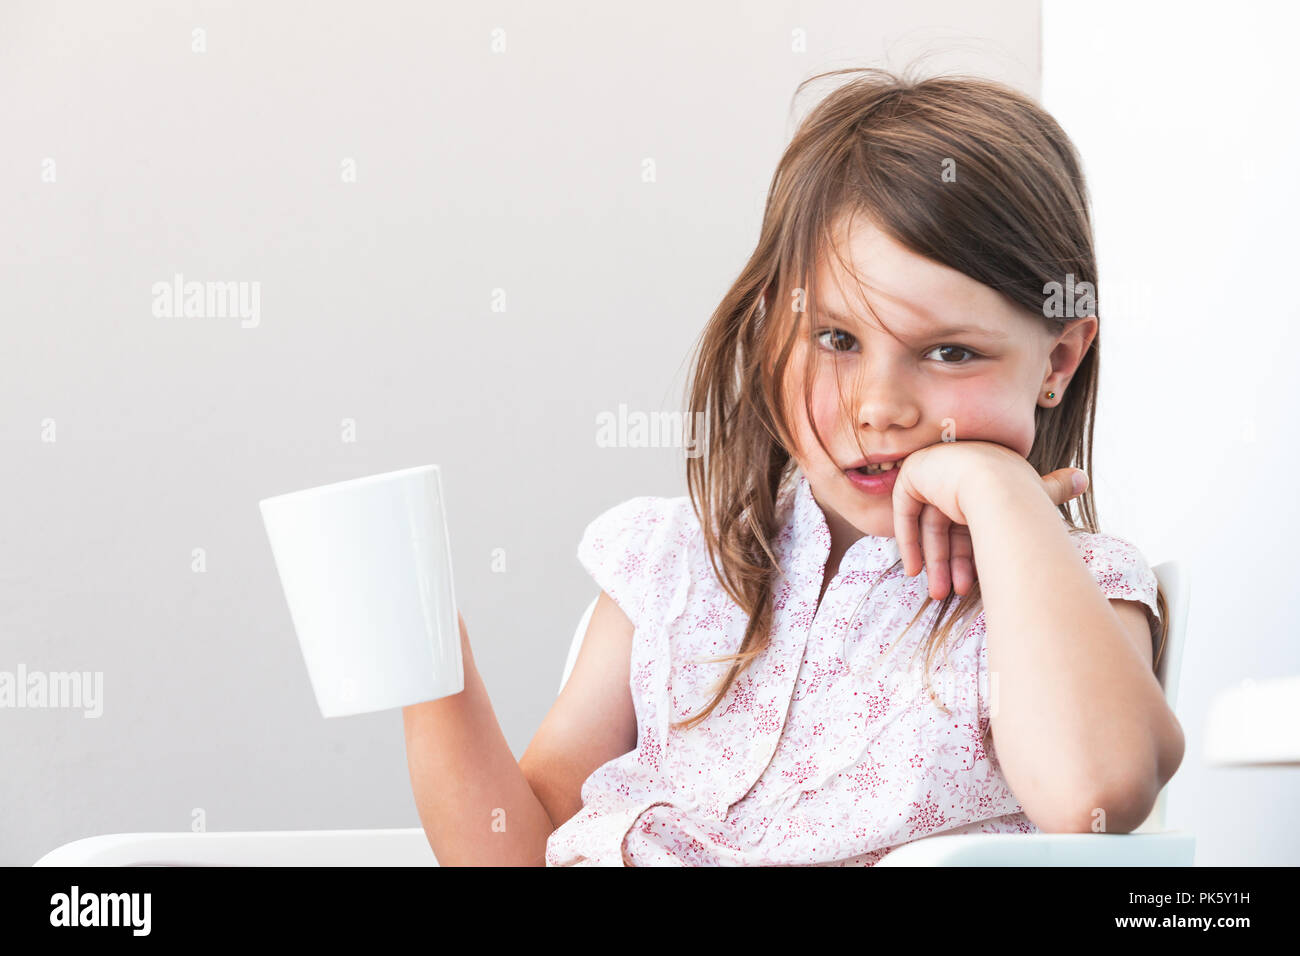 Portrait of little girl with cup of hot chocolate, close-up photo over white wall background Stock Photo